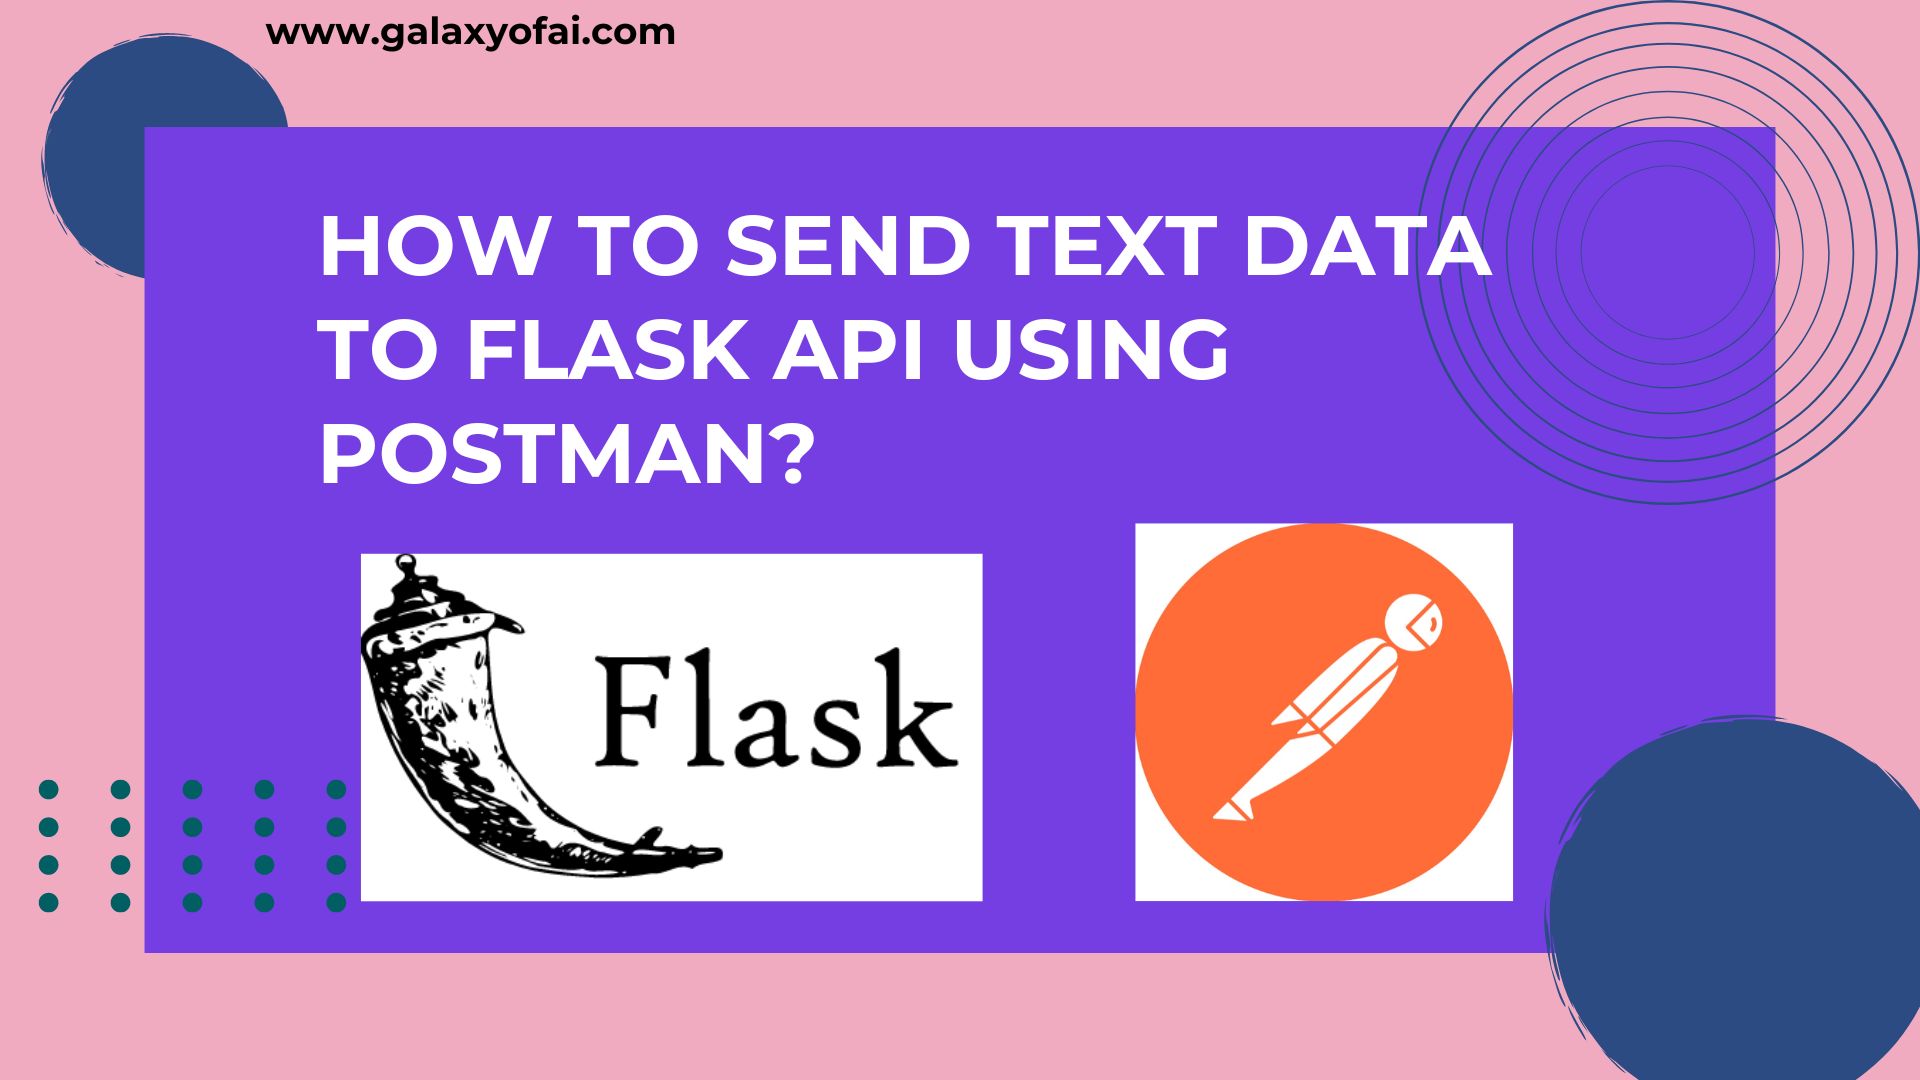 How To Send Text Data To Flask API Using Postman?